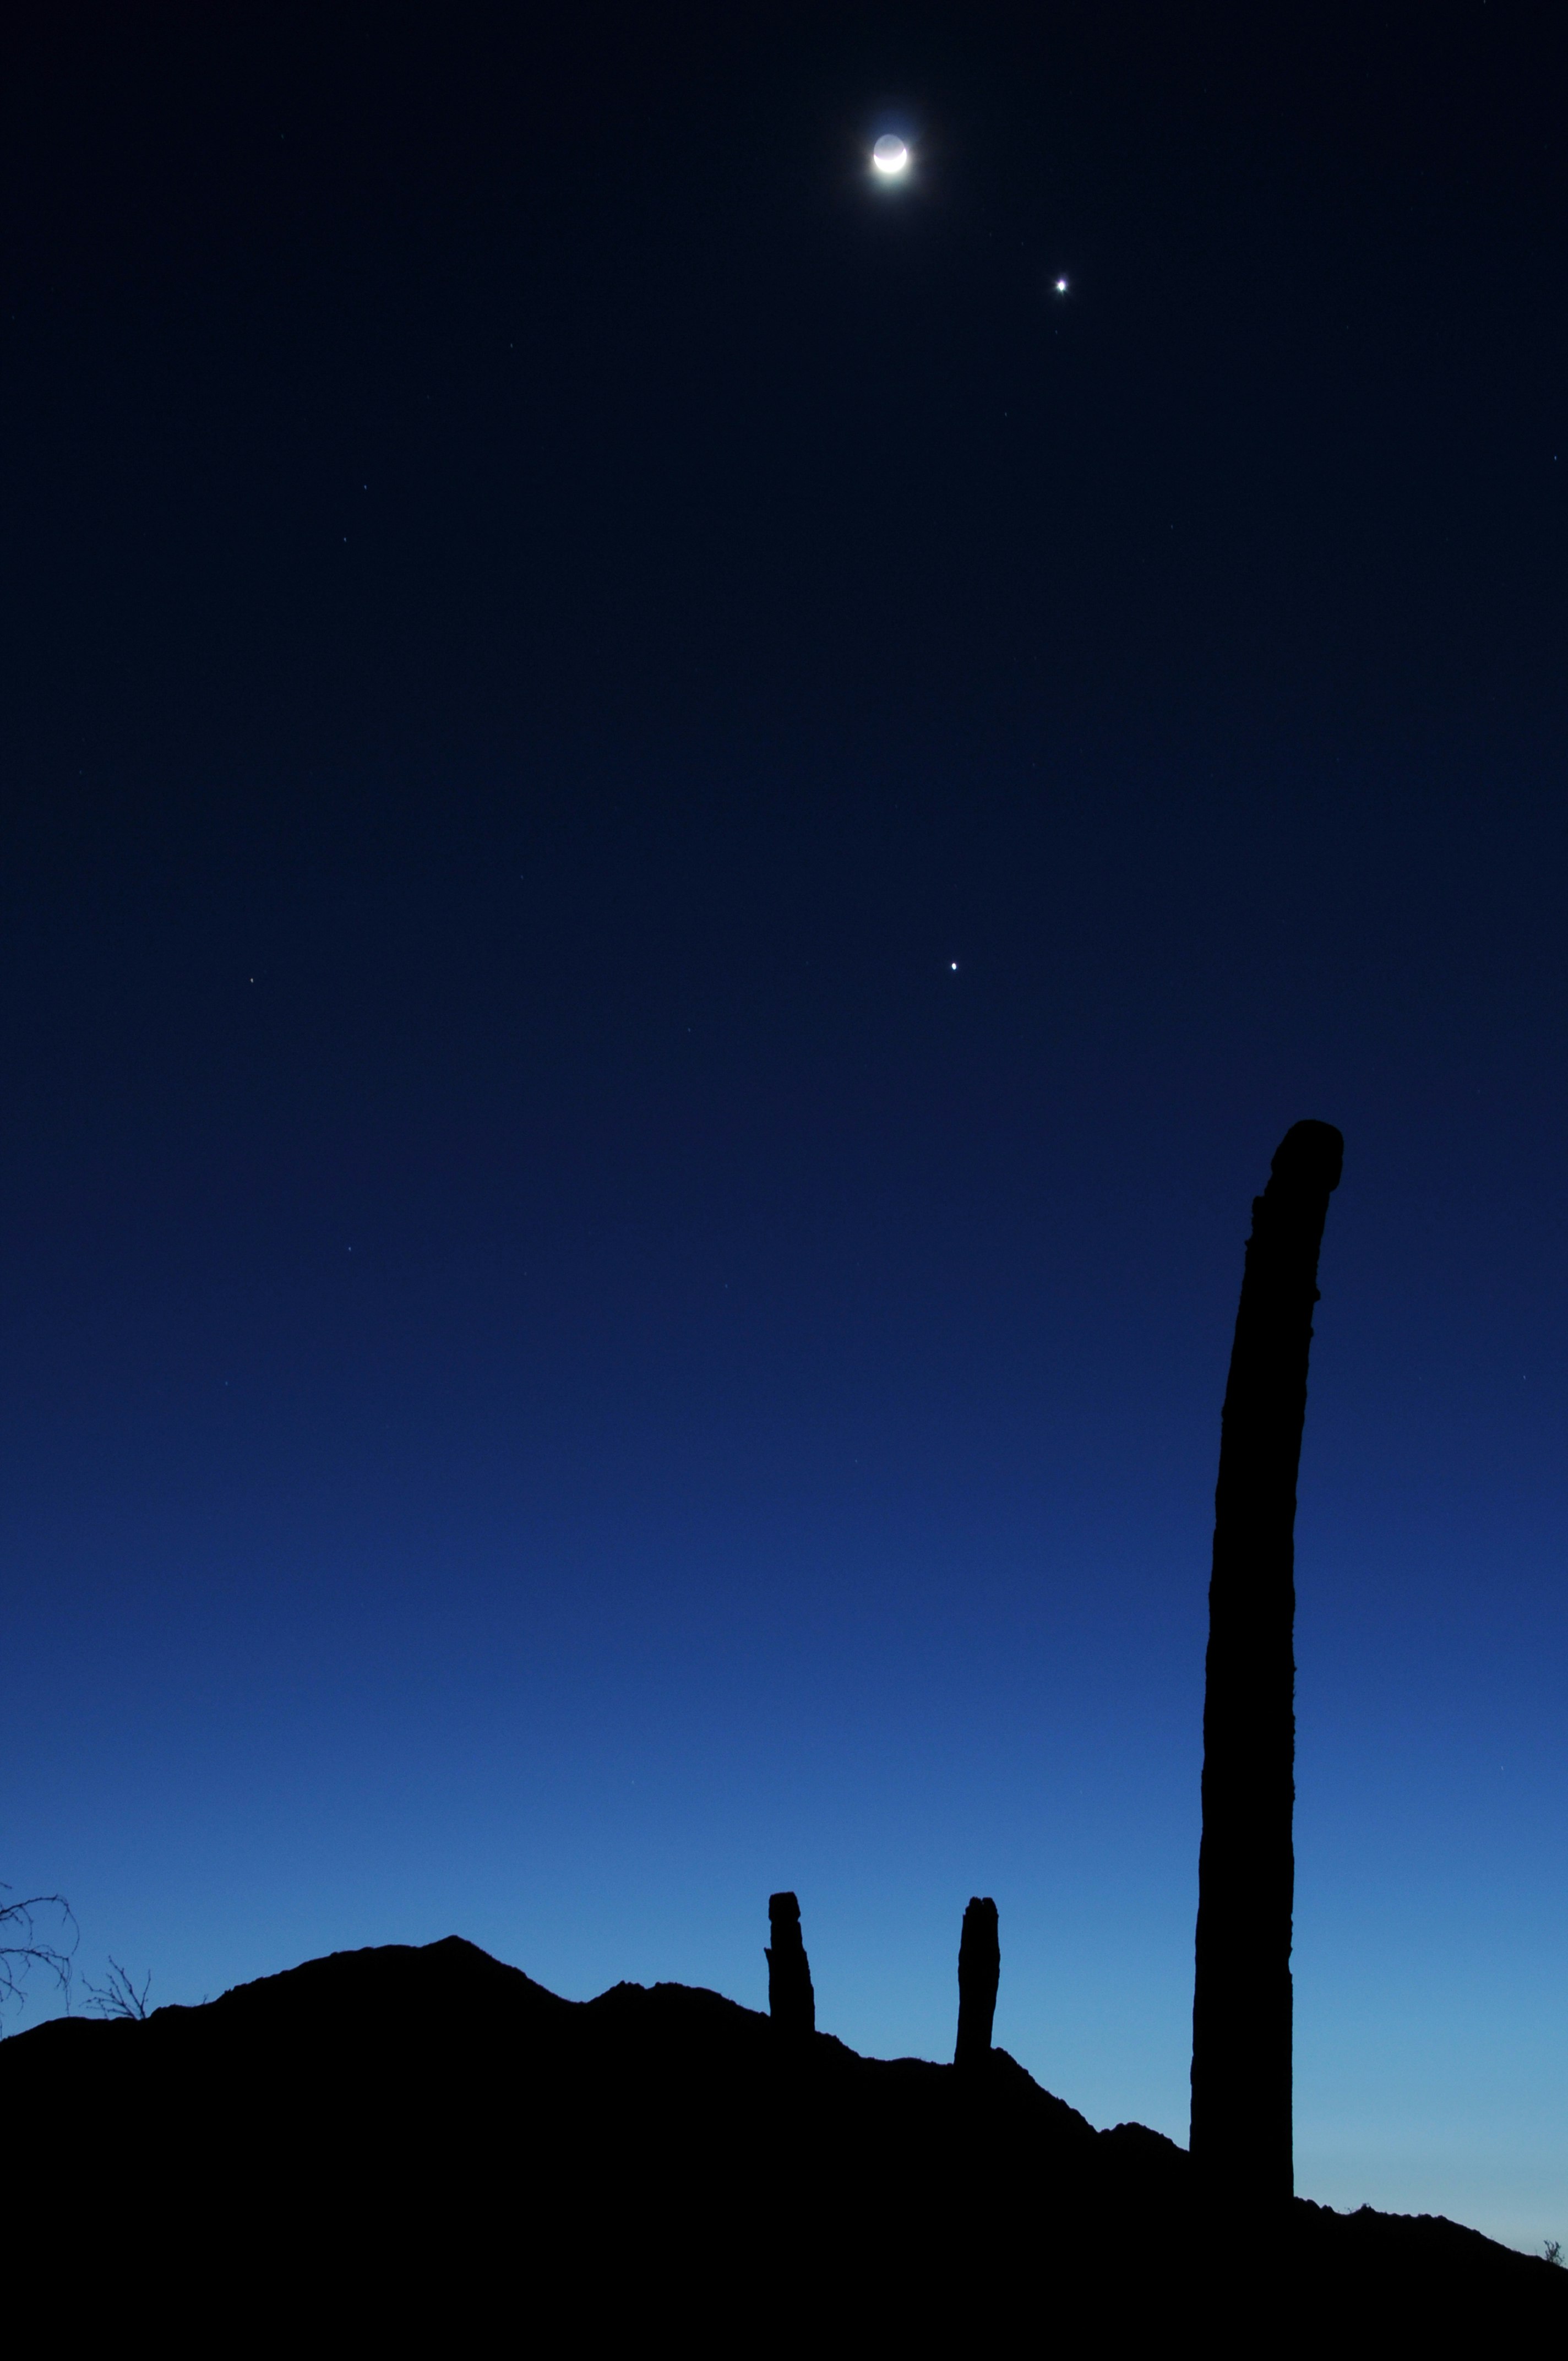 This taken at Corn Springs BLM camping area on 03/26/2015.  The event was an astral alignment of the moon, Mars and Venus. 